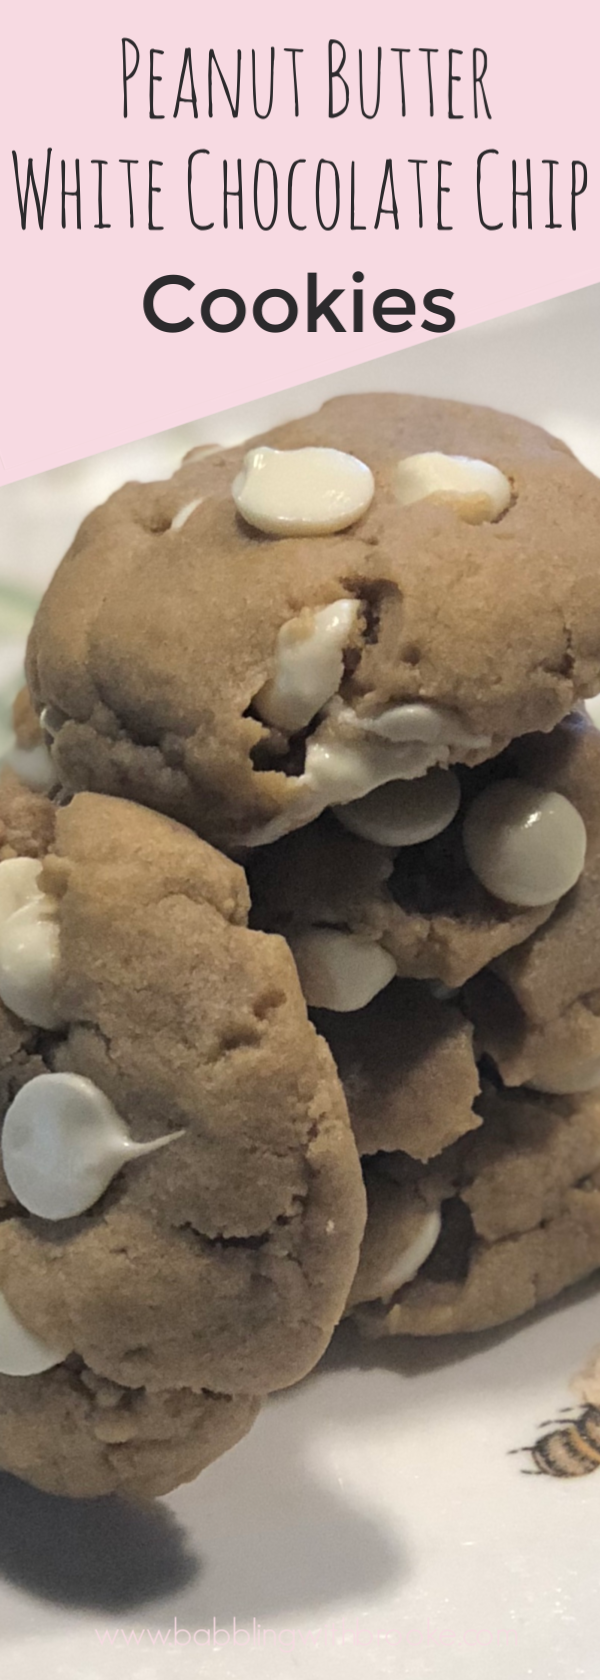 These delicious cookies are a great variation from chocolate chip cookies! The peanut butter and white chocolate chips are a great combination for a sweet treat! They are easy to make and can be made in advanced and then frozen! #cookies #whitechocolate #peanutbutter #peanutbutterwhitechocolatecookies #easycookies #sweettreats